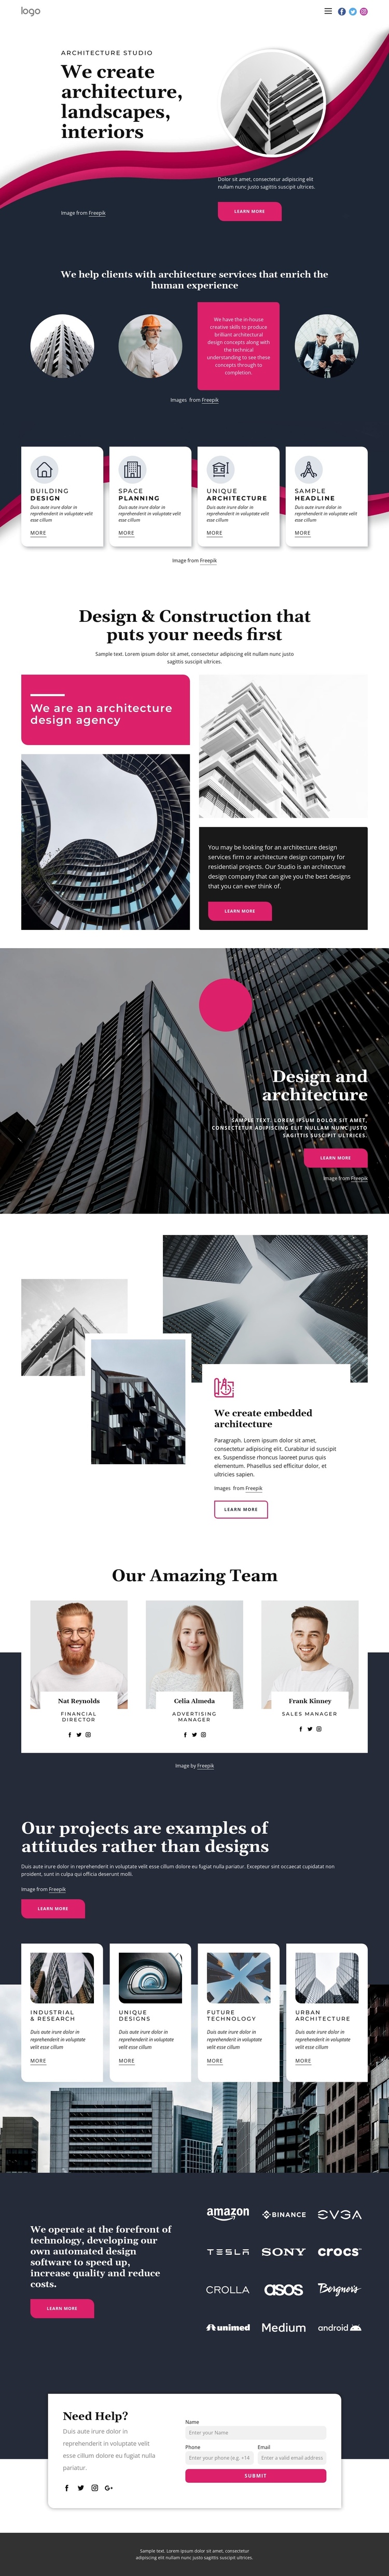 We create great architecture One Page Template